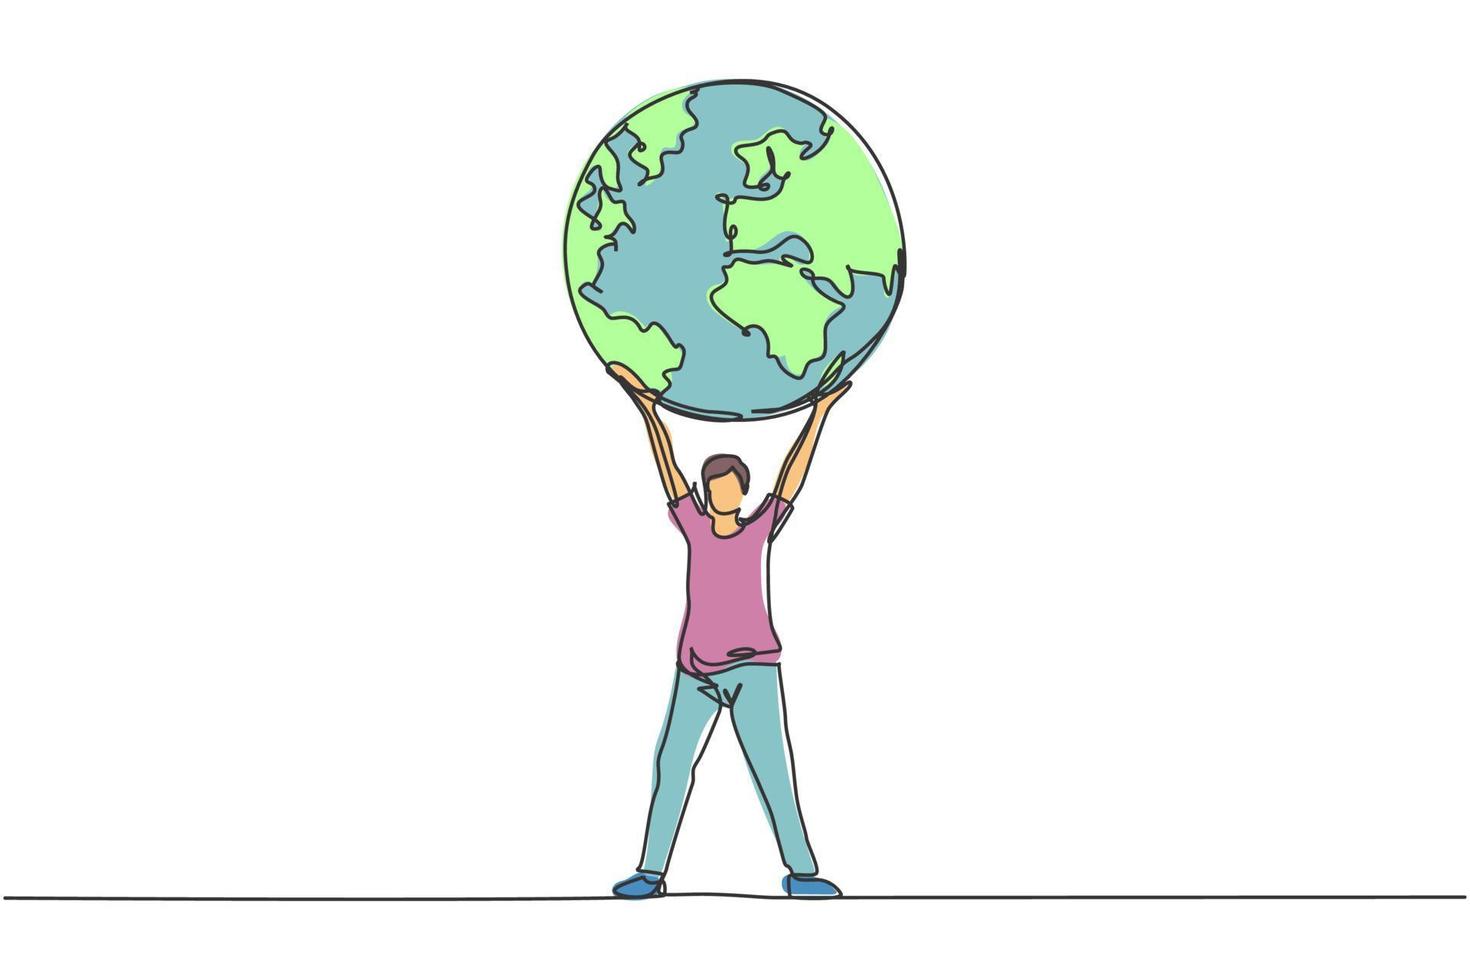 Continuous one line drawing of man holding globe earth minimalist vector illustration design on white background. Isolated simple line modern graphic style. Hand drawn graphic concept for save nature